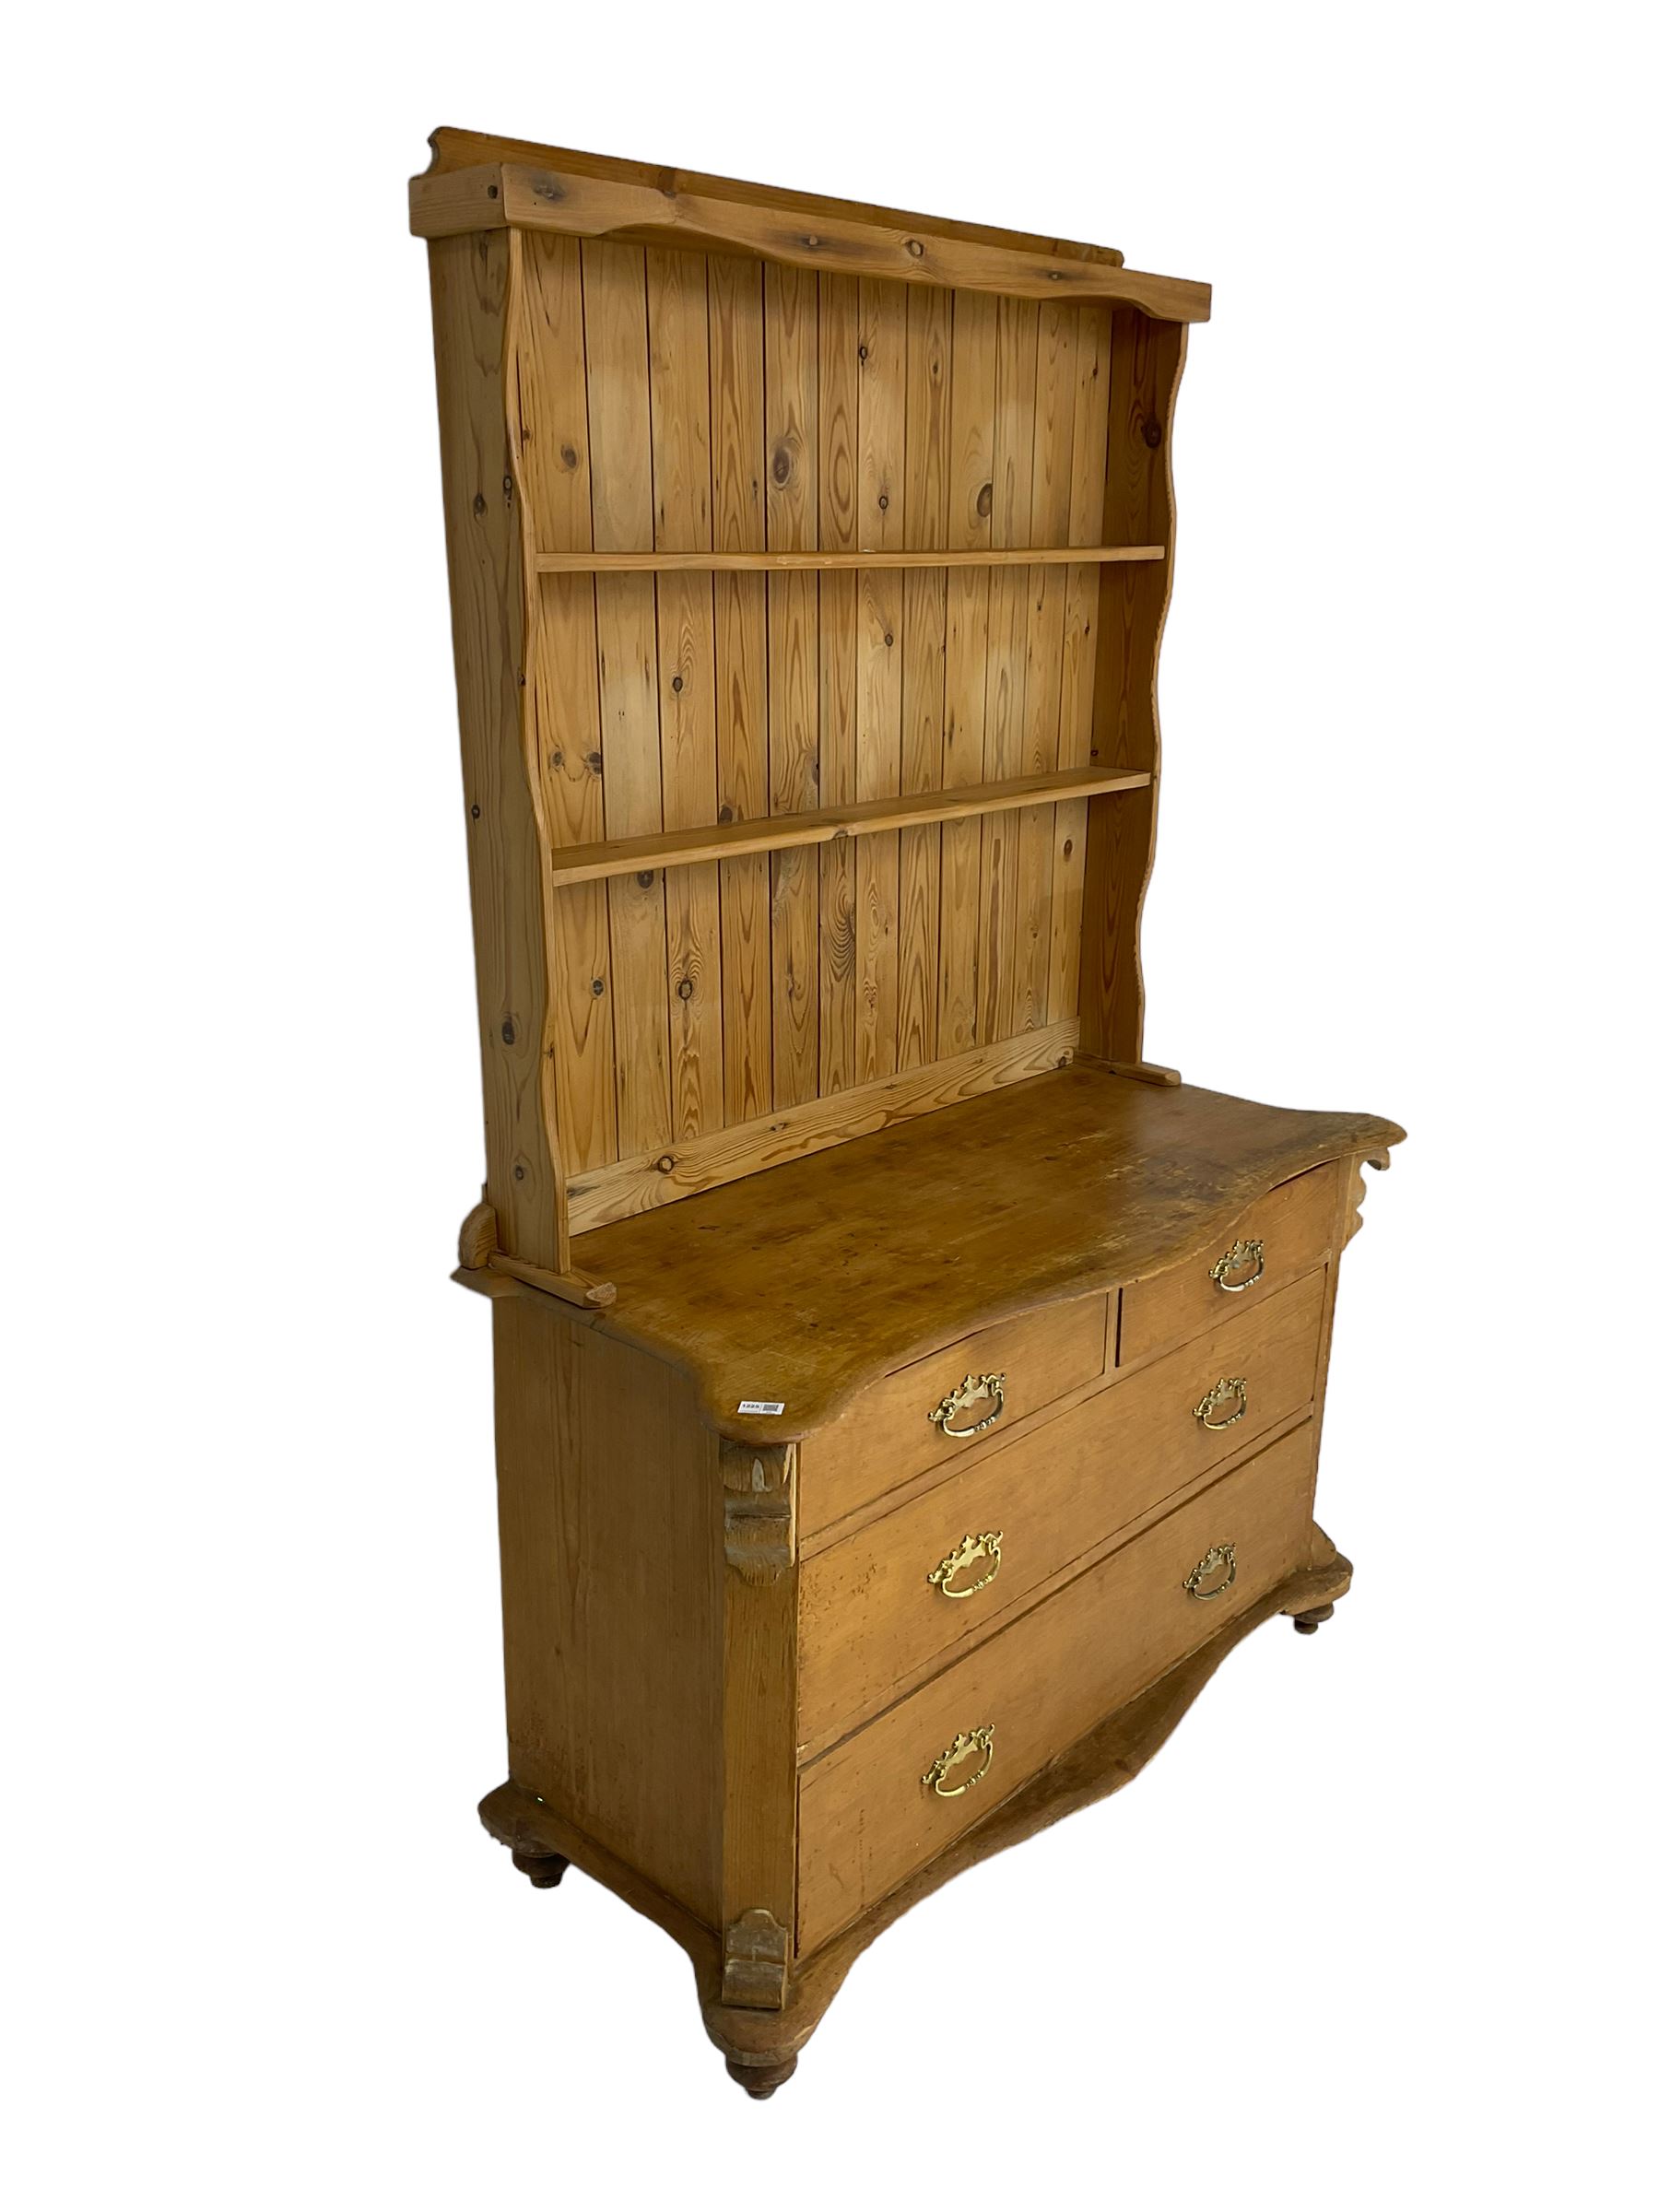 19th century and later pine farmhouse dresser - Image 2 of 8